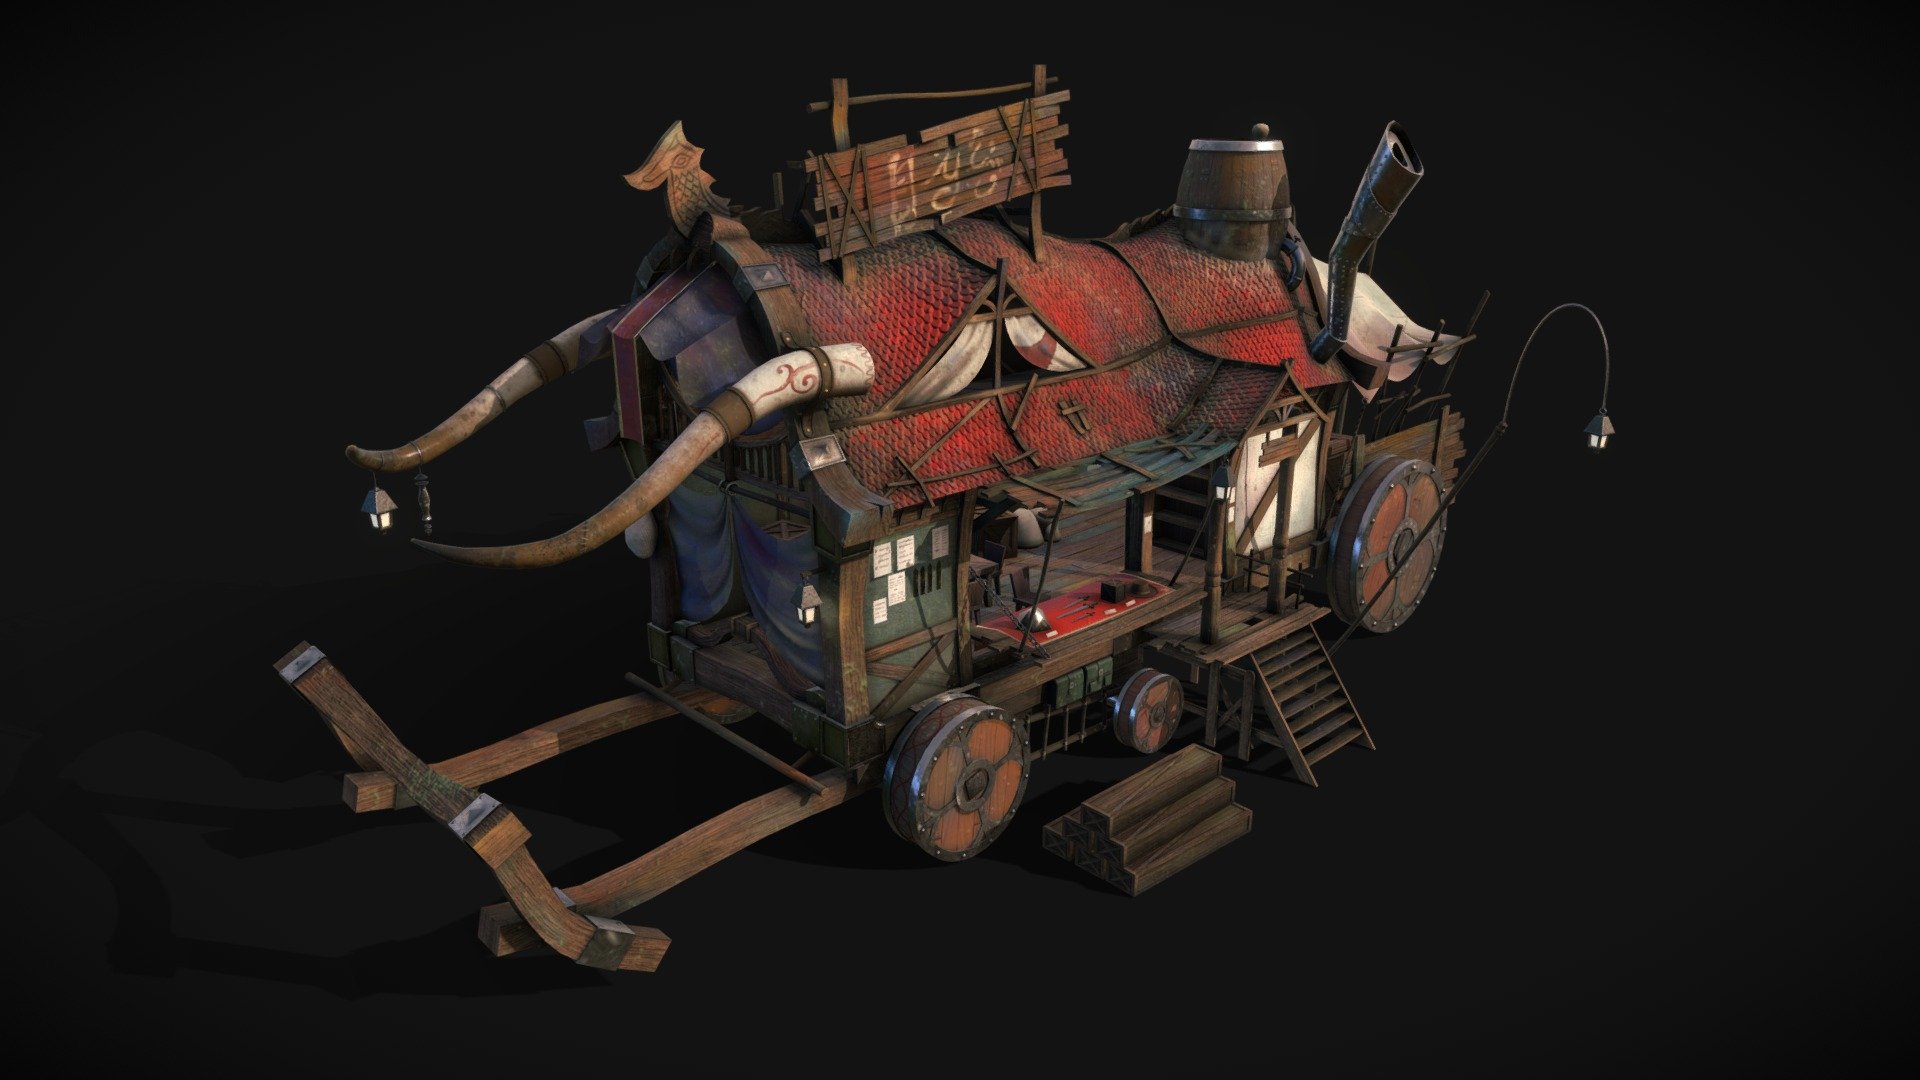 Concept by Haejoon Cho - Mobile fantasy shop - 3D model by mary_sparks 3d model